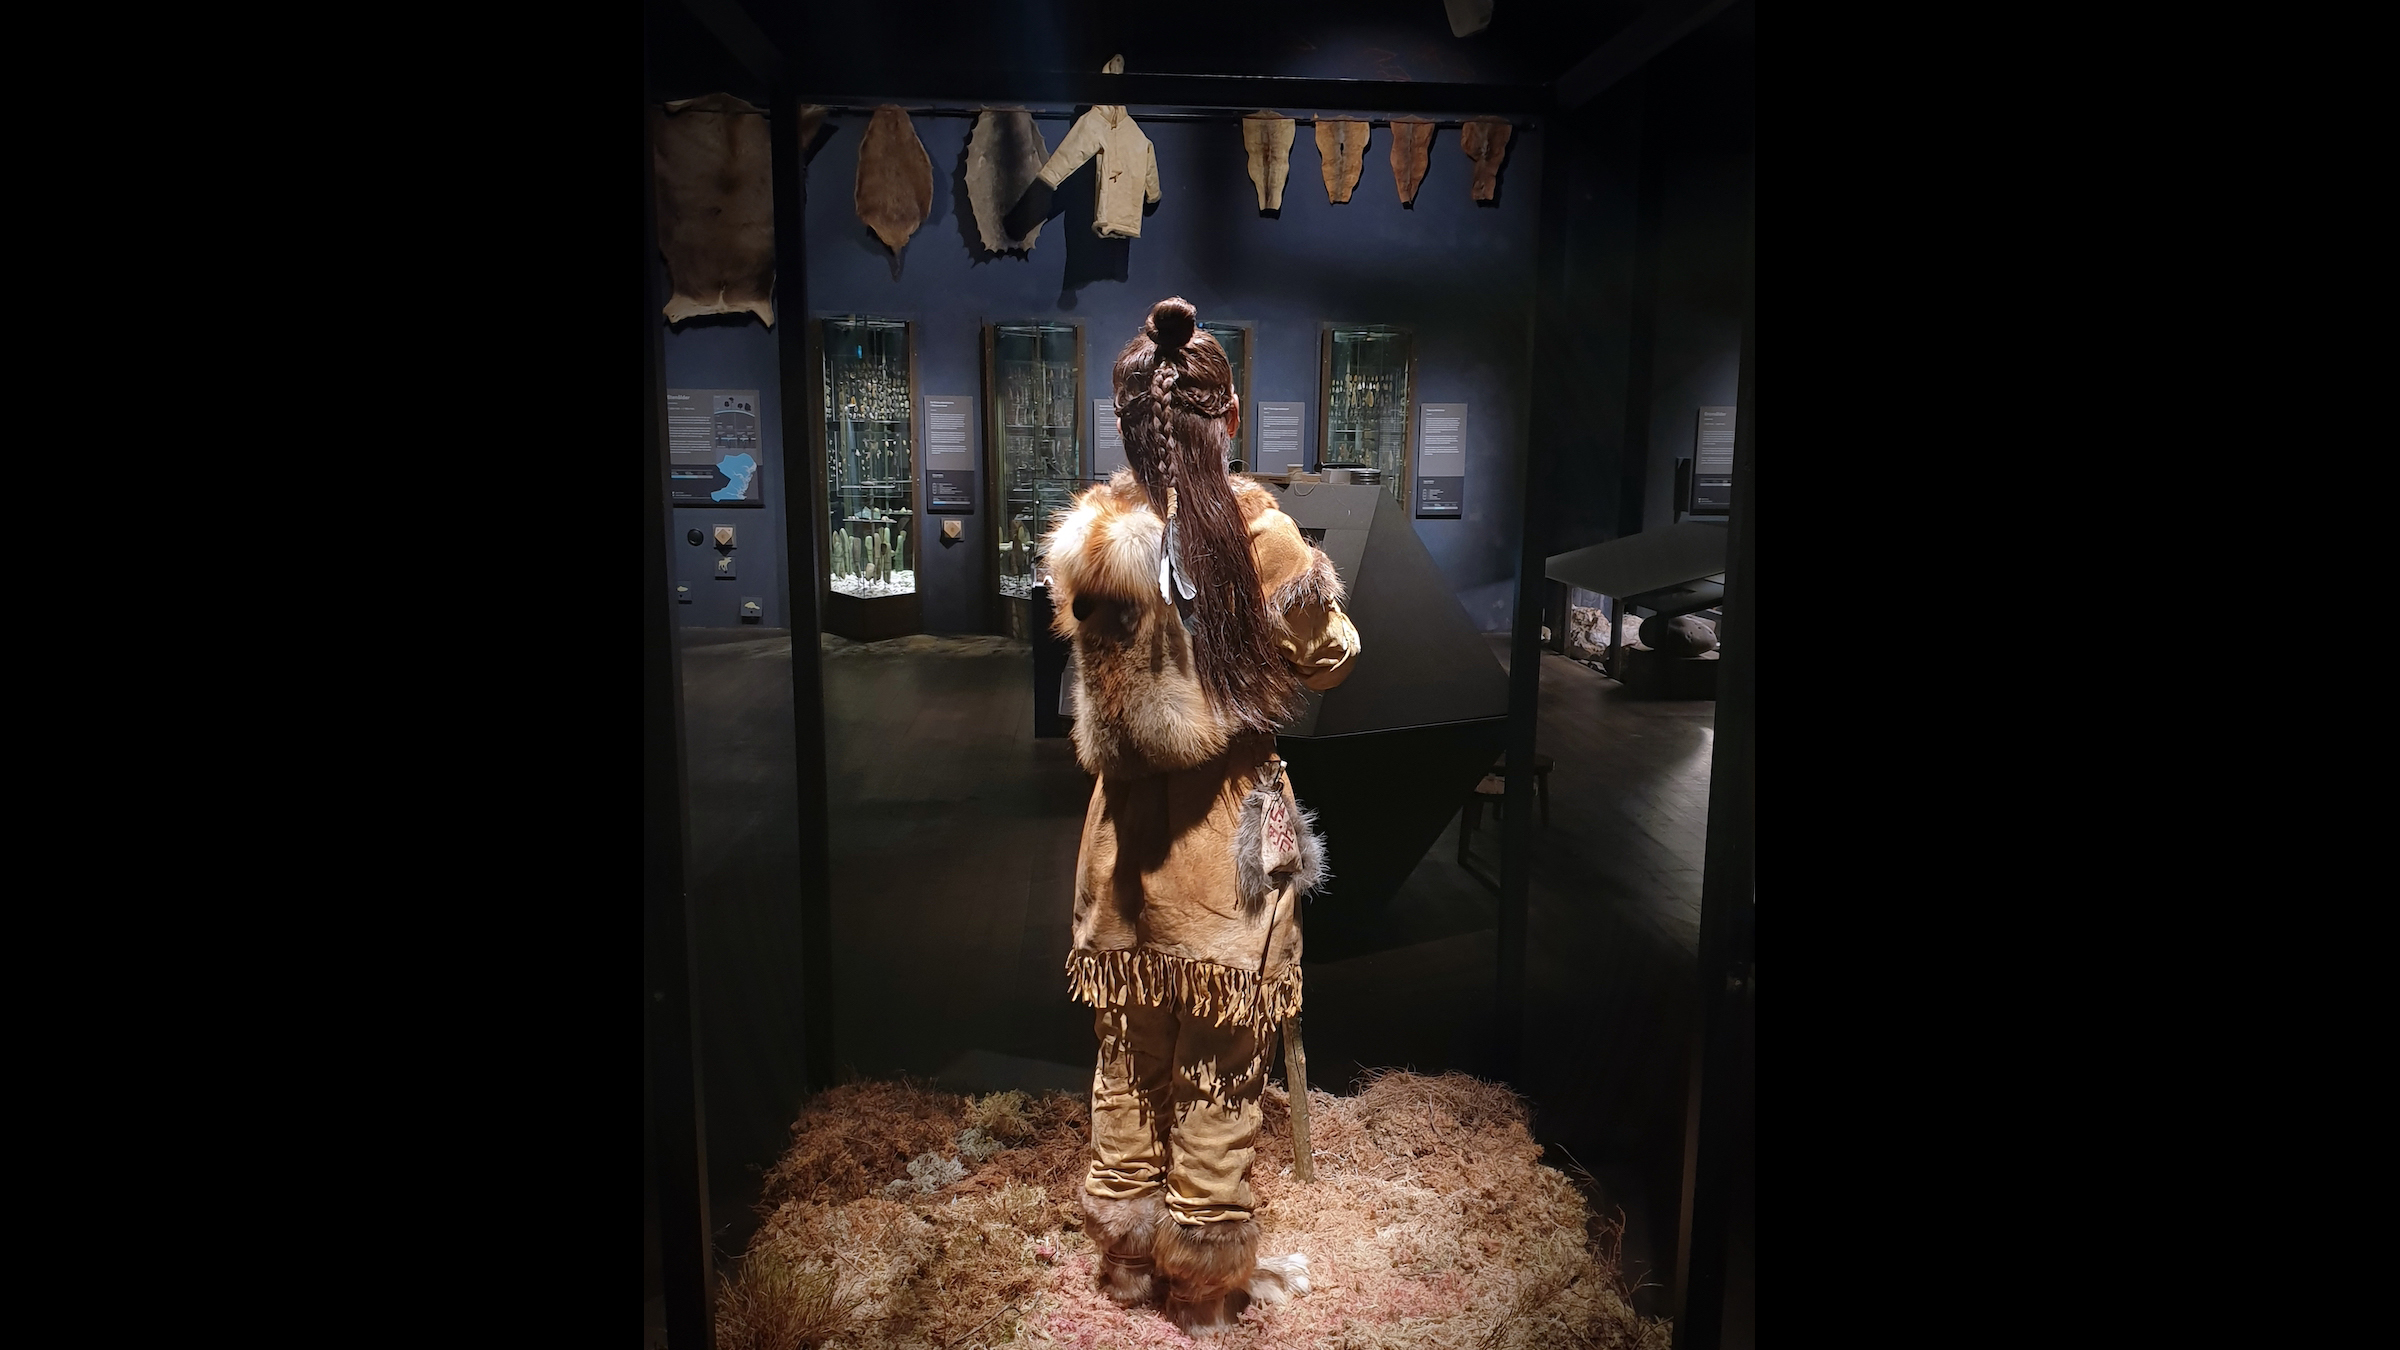 The Neolithic woman's clothing was inspired by those from Indigenous Americans, Indigenous Siberians and Ötzi the iceman mummy.